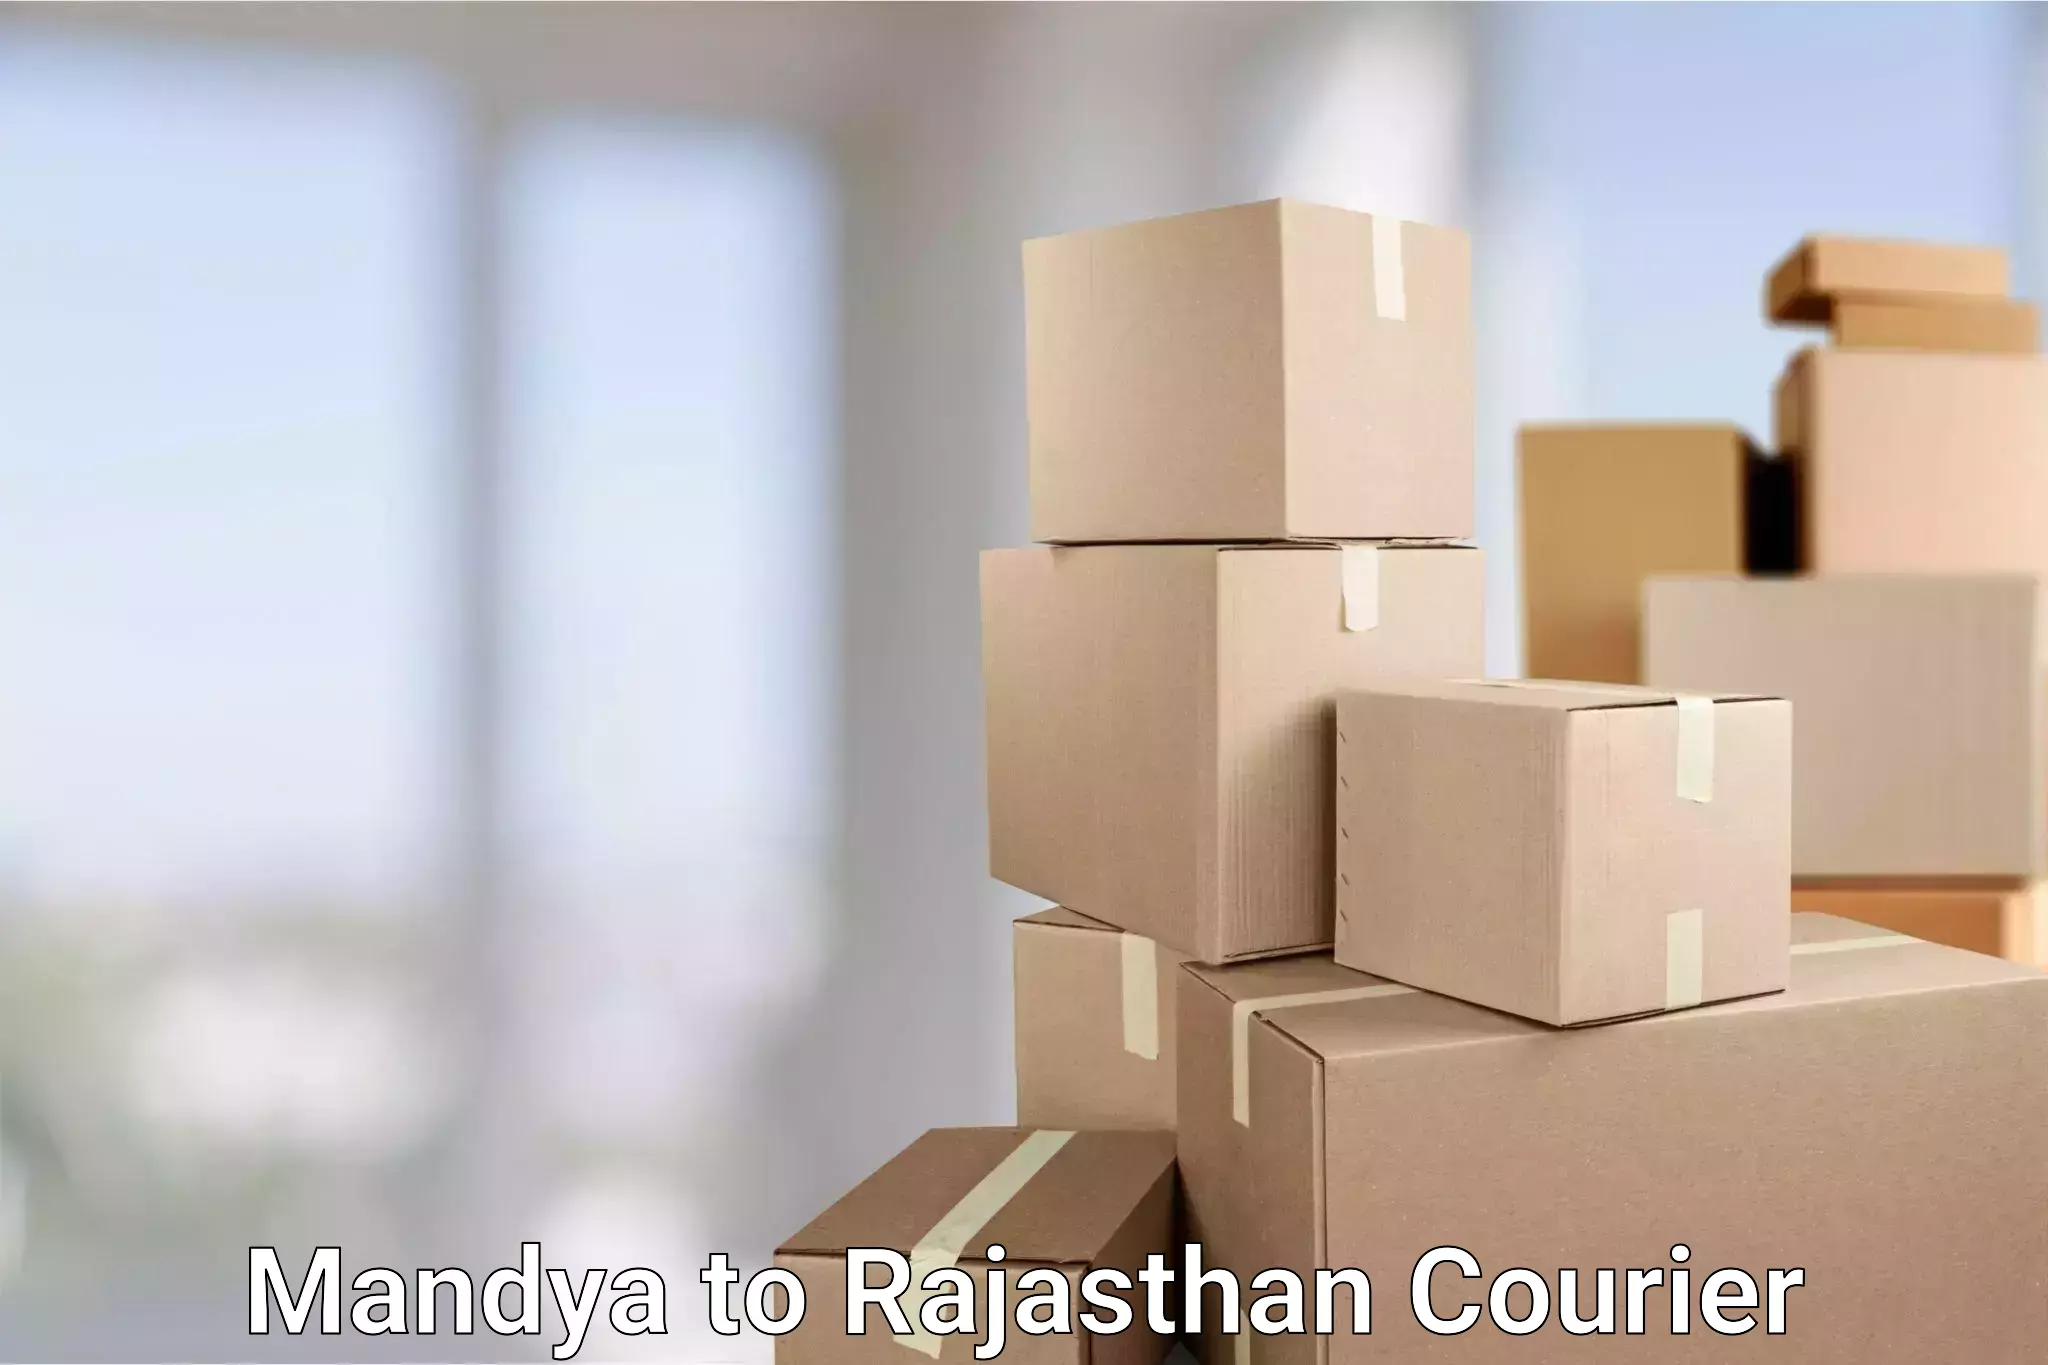 Package delivery network Mandya to Sawai Madhopur